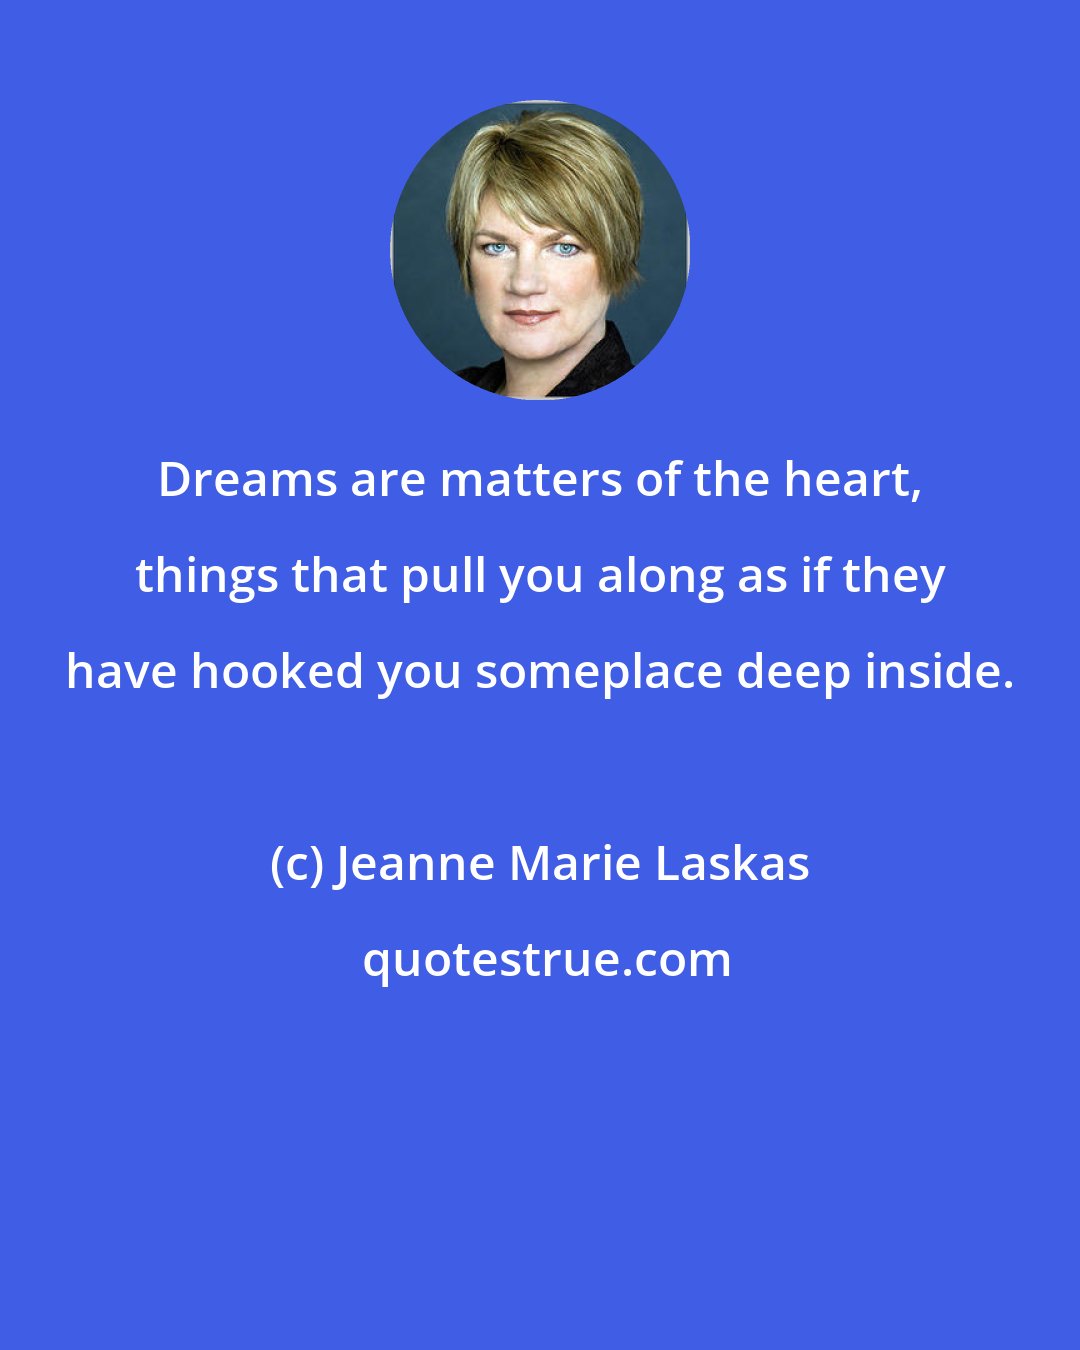 Jeanne Marie Laskas: Dreams are matters of the heart, things that pull you along as if they have hooked you someplace deep inside.